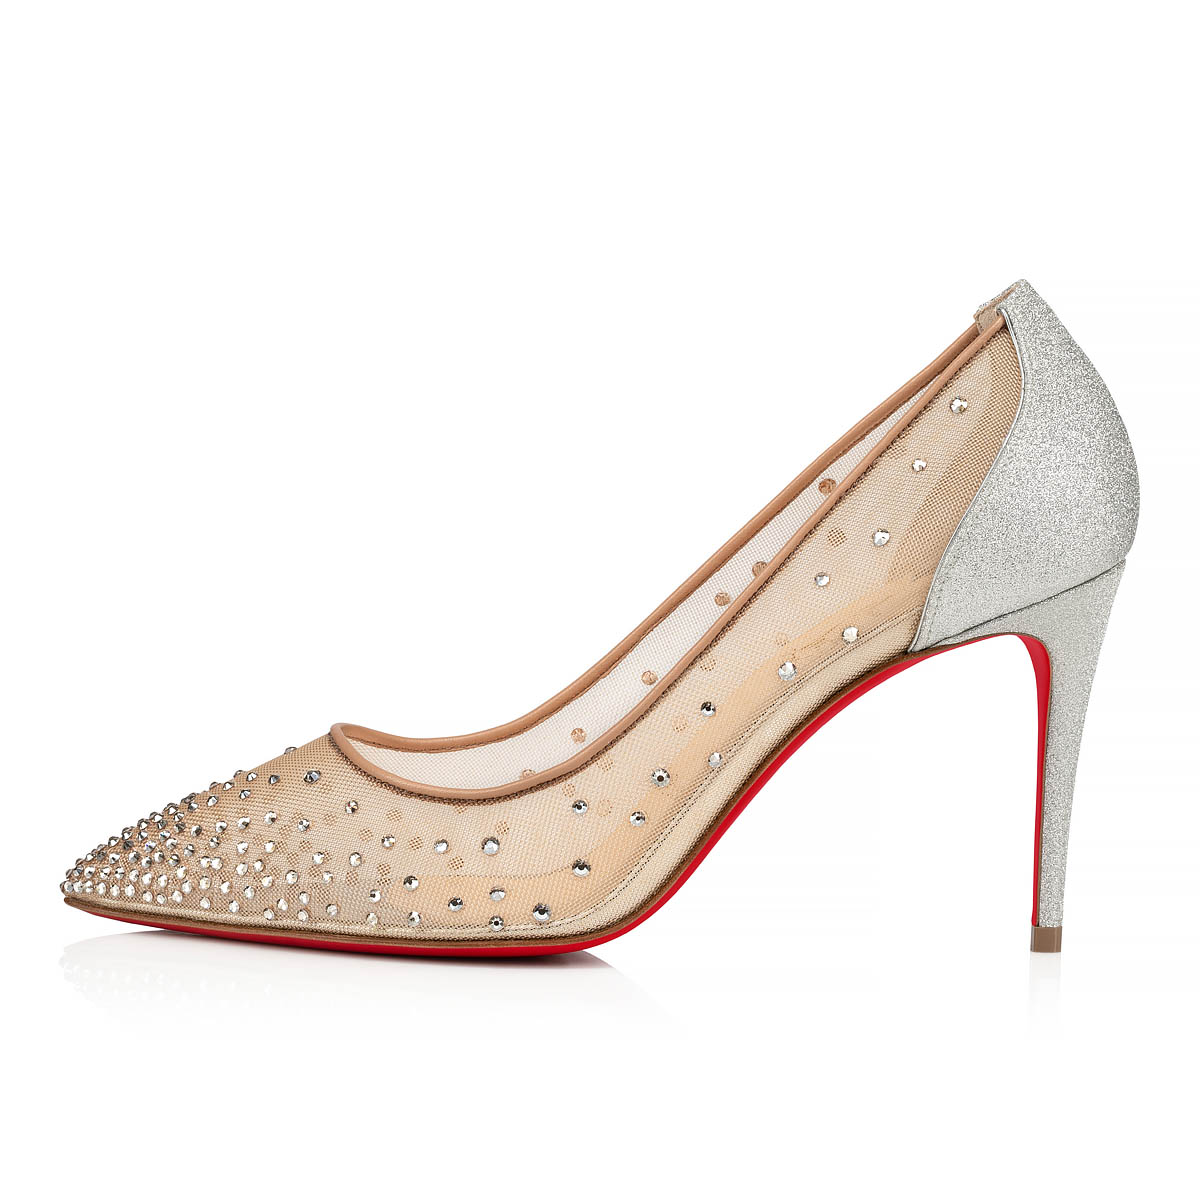 Follies Strass - 85 mm Pumps - Fishnet, glittered leather and